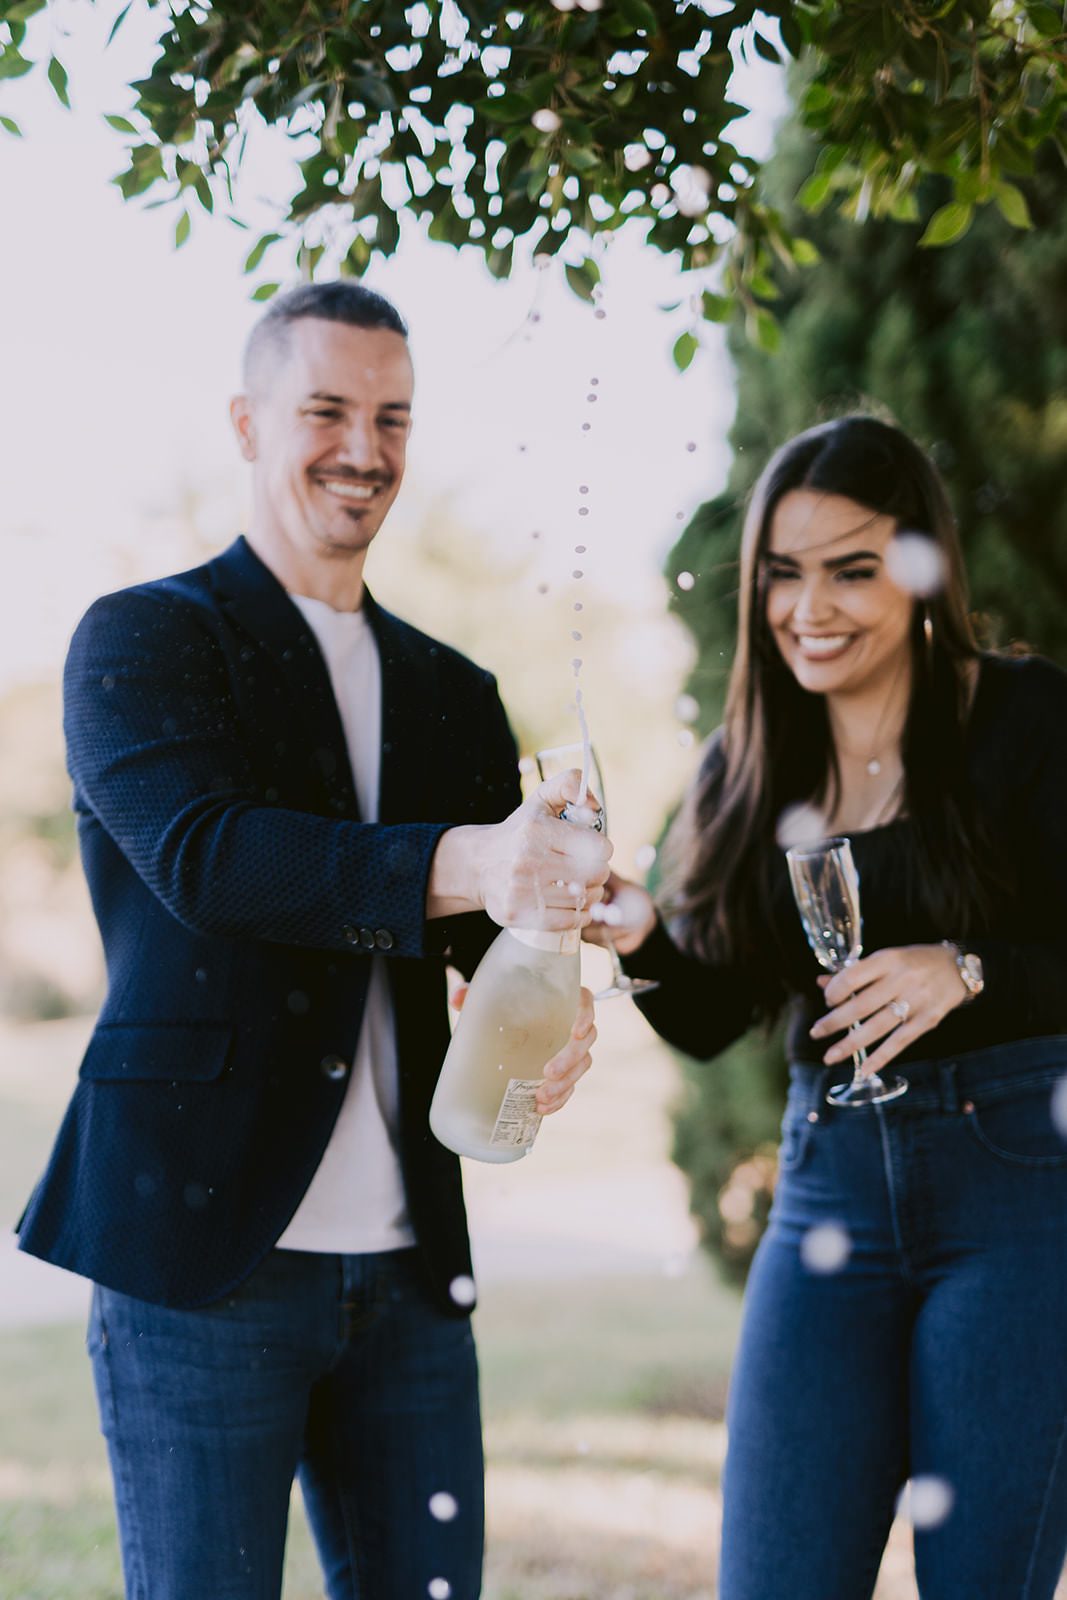 couple celebrating engagement with champagne